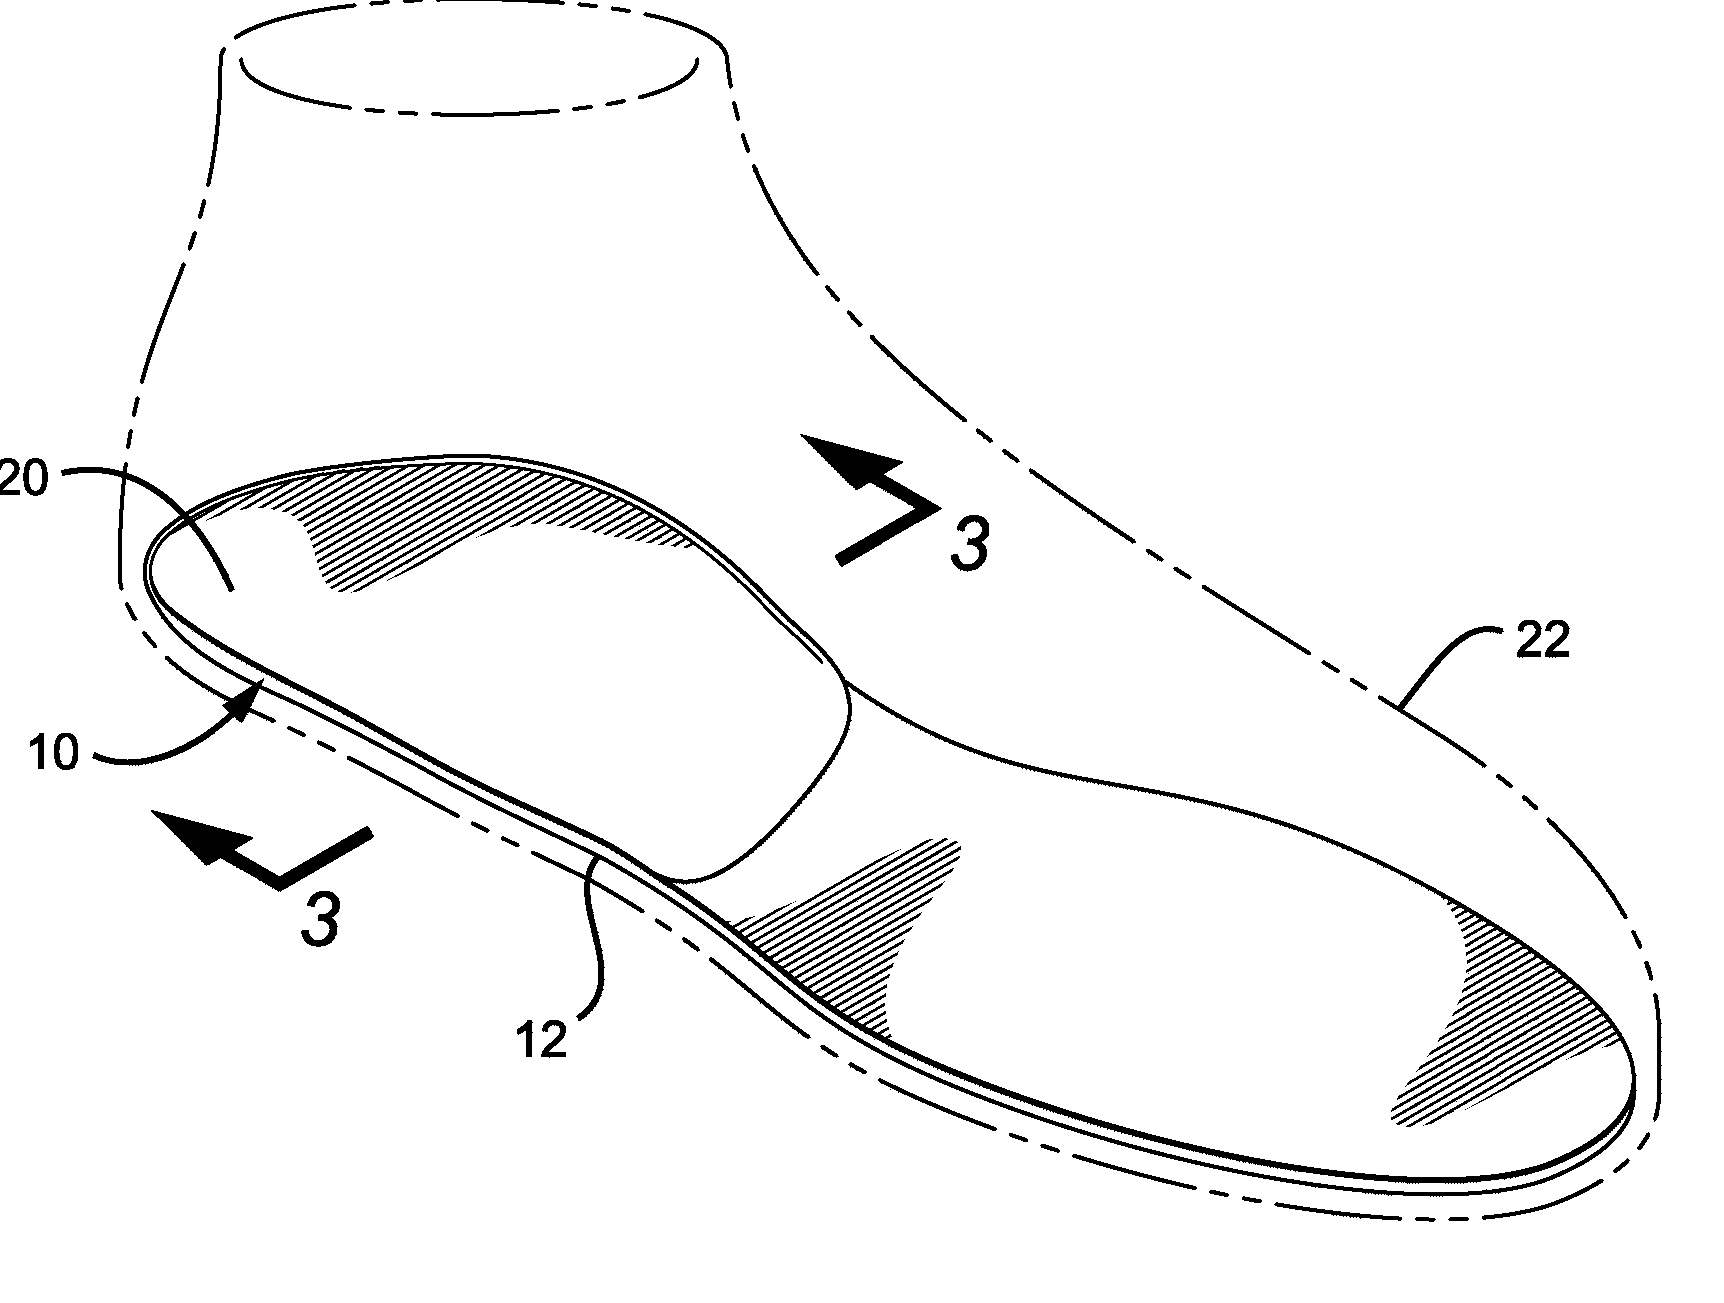 Customized orthopedic sole-insert and method for making